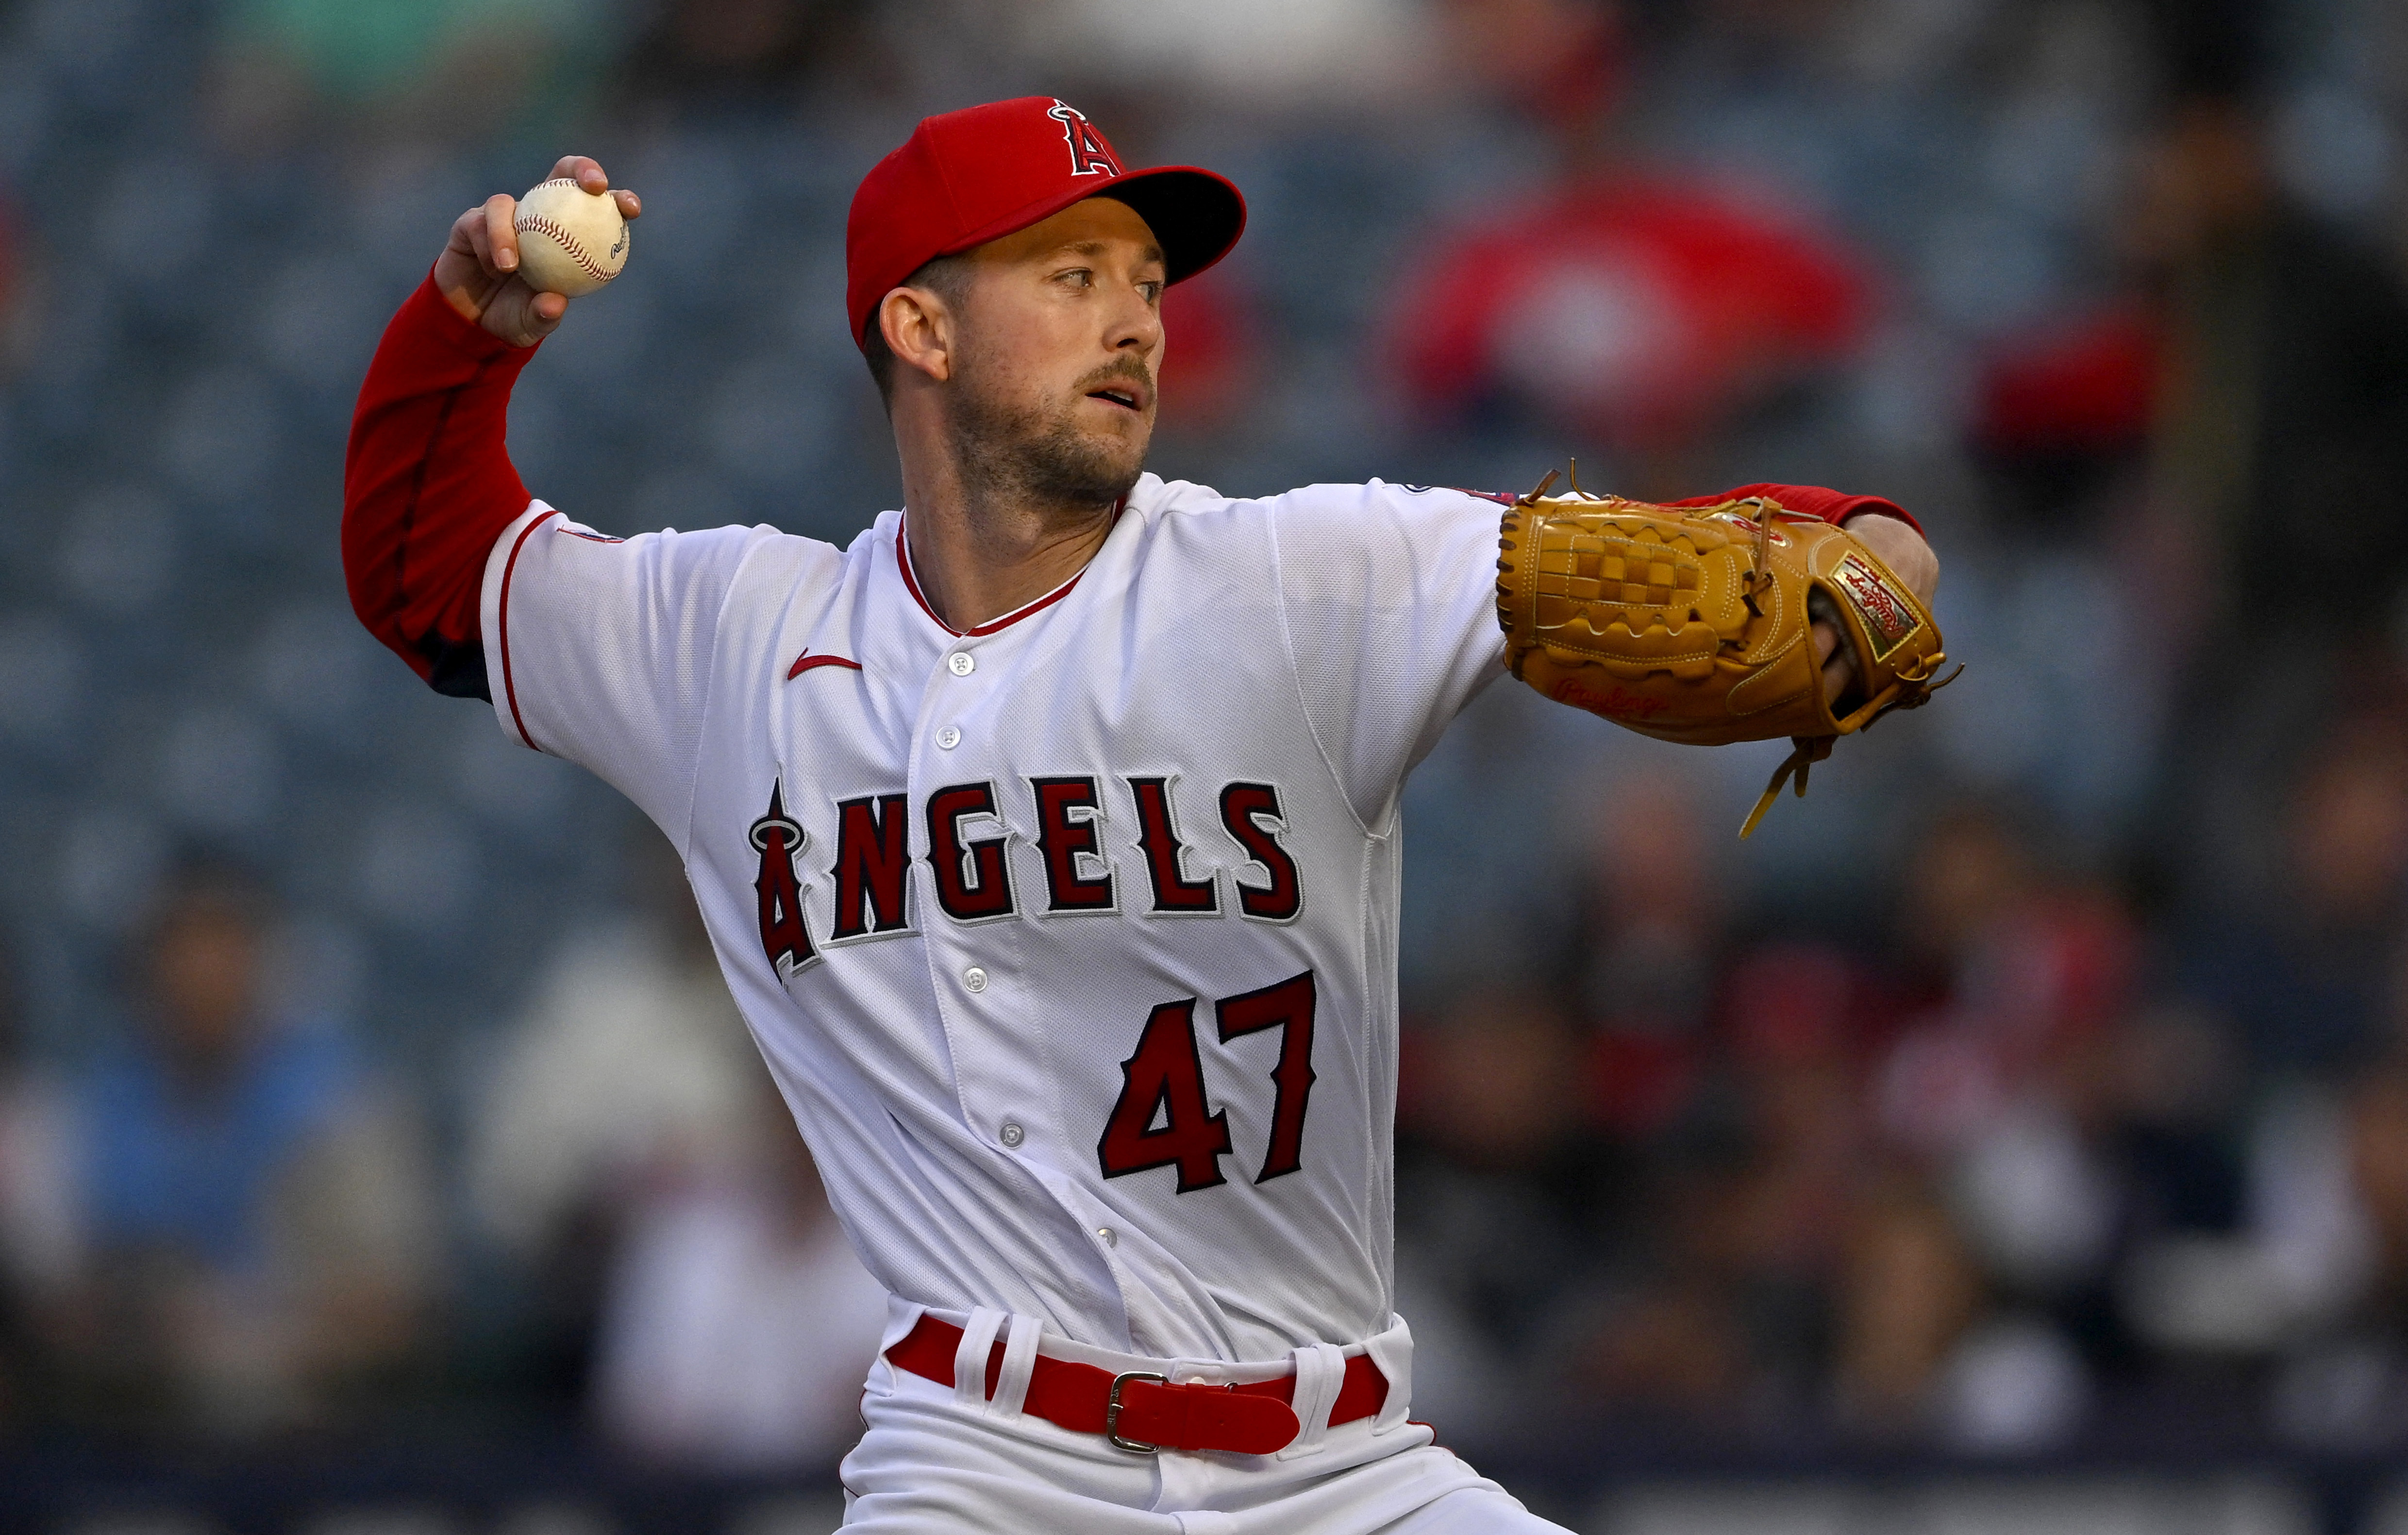 Angels' bullpen shuts down A's to seal win